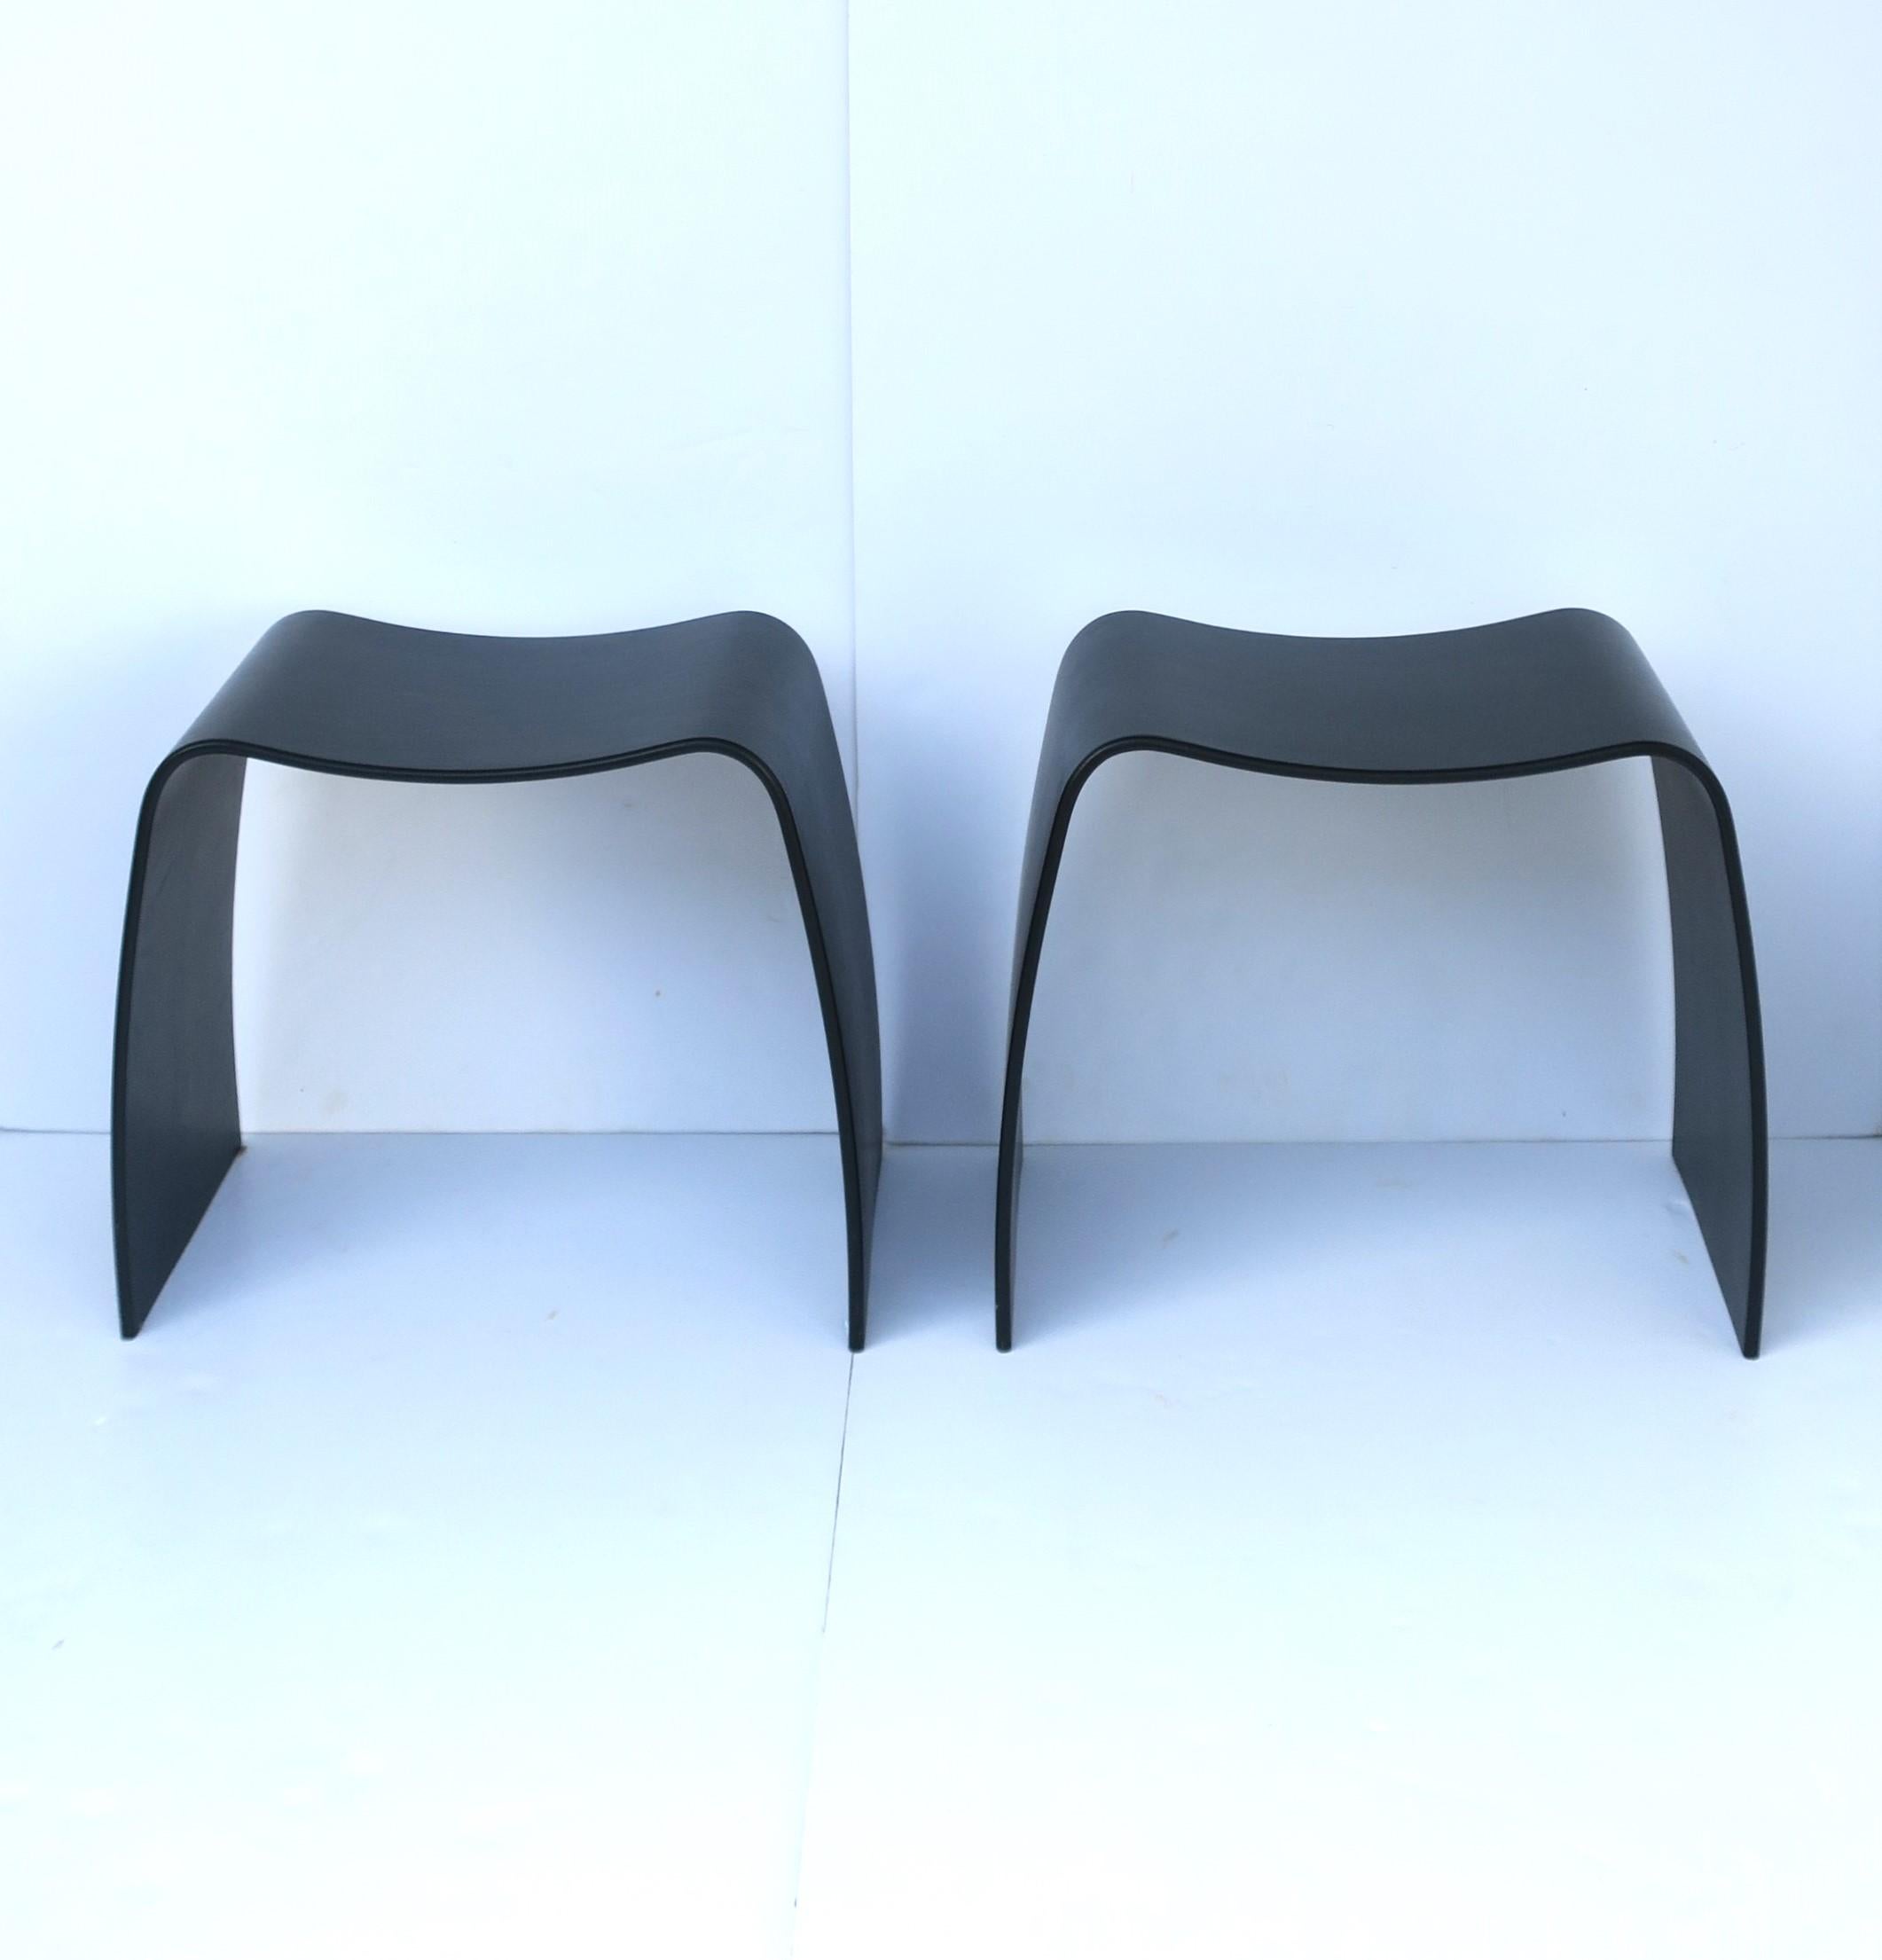 Black Jørgen Møller M-Stools Benches Danish, Pair In Good Condition For Sale In New York, NY